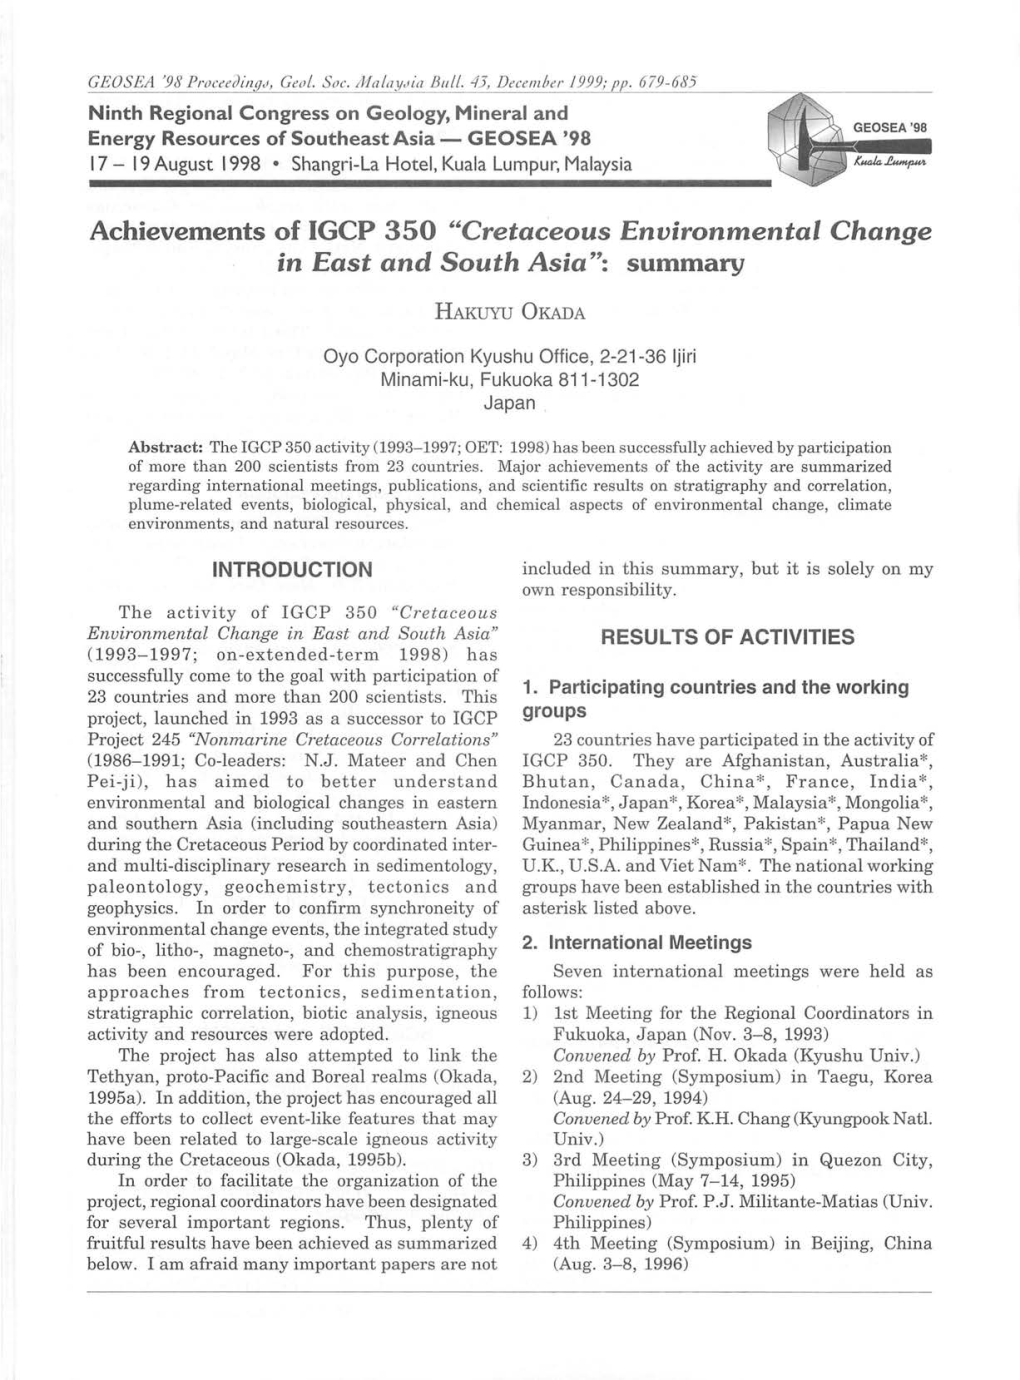 Cretaceous Environmental Change in East and South Asia": Summary